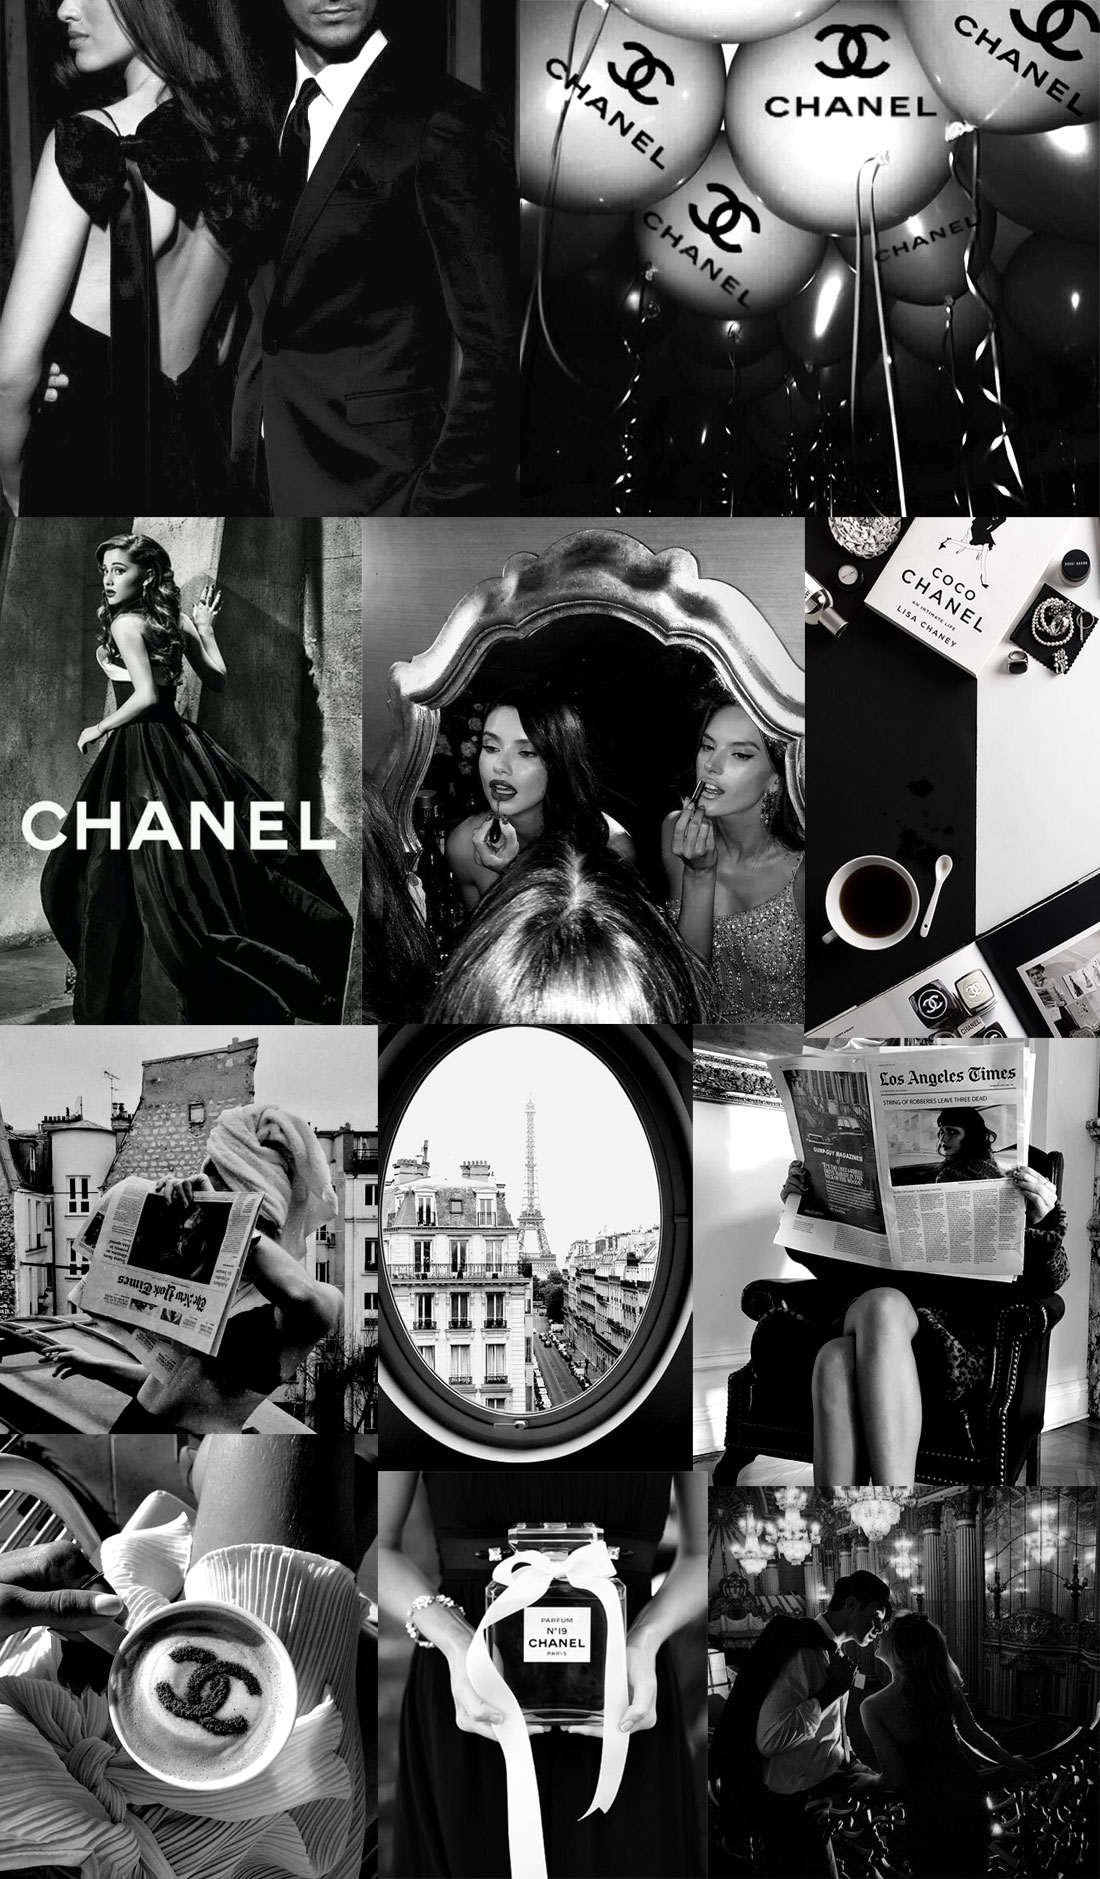 rich girl aesthetic, luxury life aesthetic, paris black collage, chanel wallpaper collage, black collage , black collage wallpaper, wallpaper collage black, black collage aesthetic wallpaper, black collage wallpaper laptop, black collage wallpaper iphone, black aesthetic collage, black and white aesthetic collage